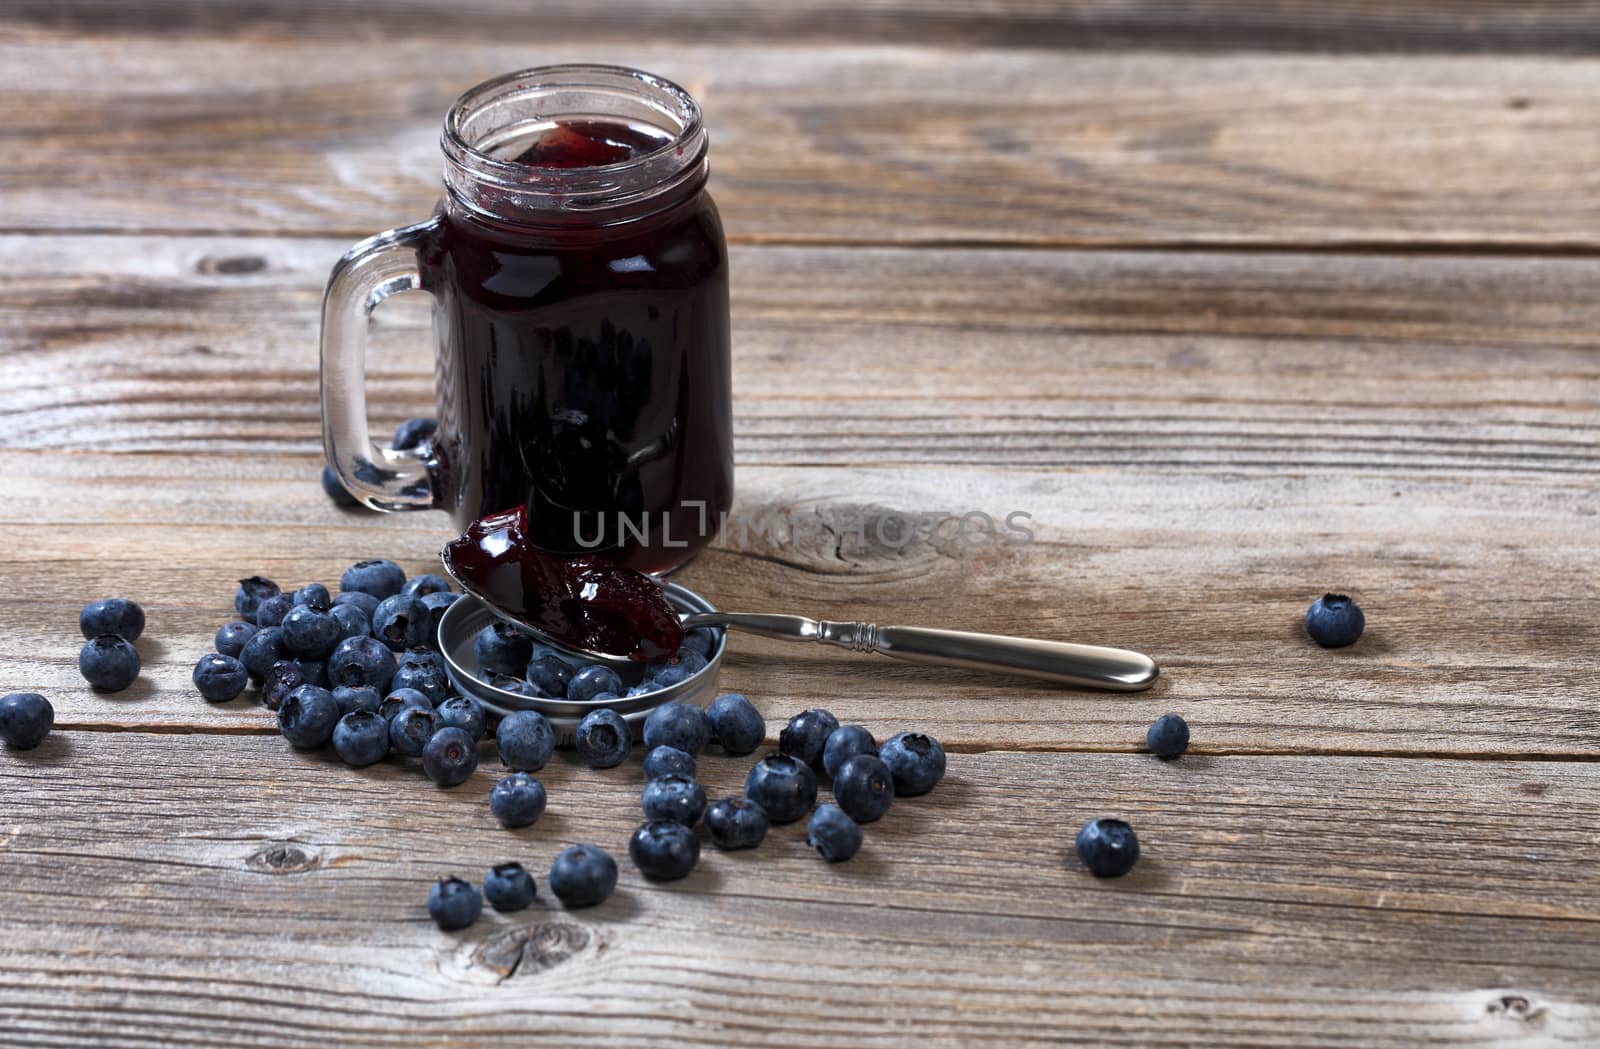 Blueberry jam in spoon with fresh ripe blueberries and jar in background on rustic wood